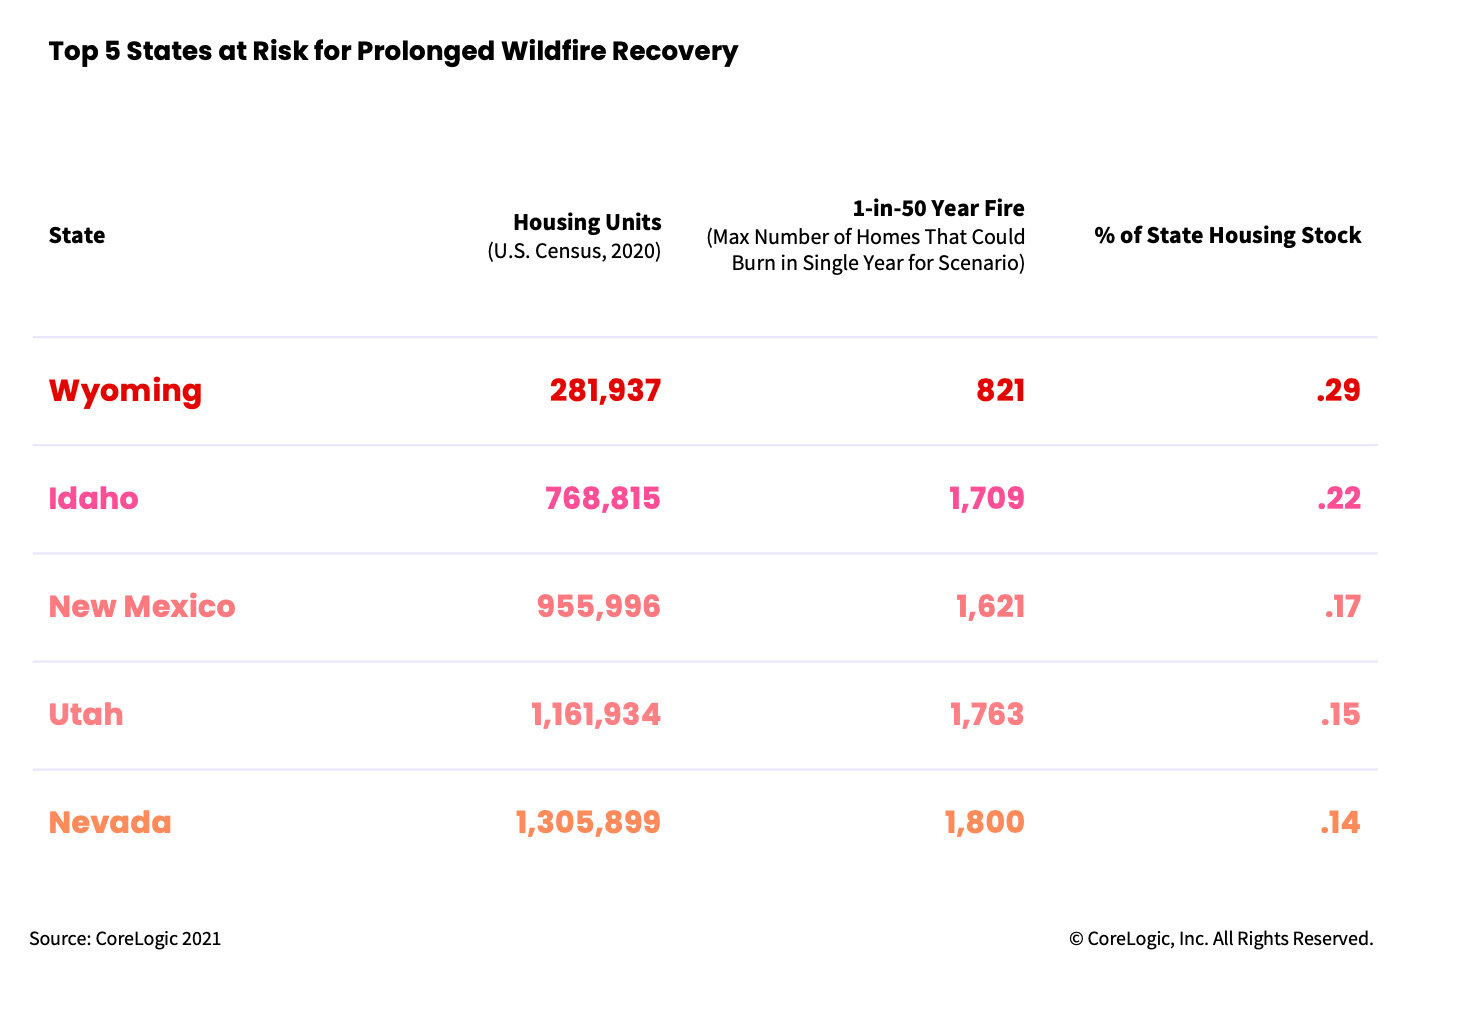 https://www.worldpropertyjournal.com/news-assets/Top-5-states-at-risk-for-prolonged-wildfire-recovery.jpg